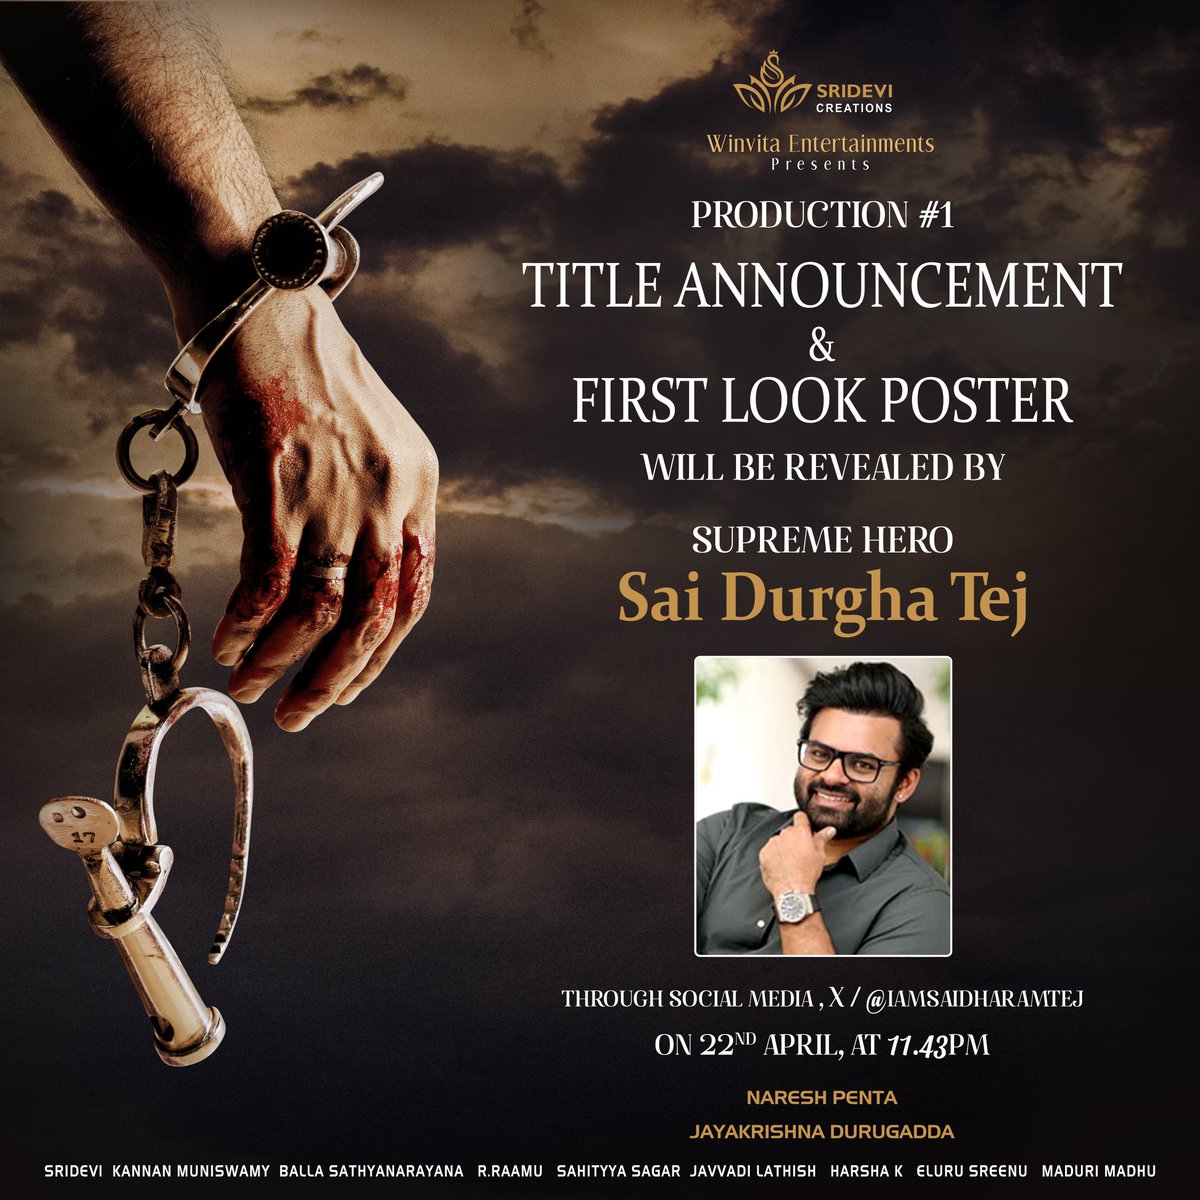 We are official digital partners for this film.. thanks to director #Naresh Anna 

SreeDeviCreations - @winvitaa  Presents ProductionNo1 - Title Announcement & First Look Poster Launch by Supreme Hero @IamSaiDharamTej Tomorrow at 11:43 PM ! ❤️‍🔥 

#SreeDevi #KannanMuniswamy…